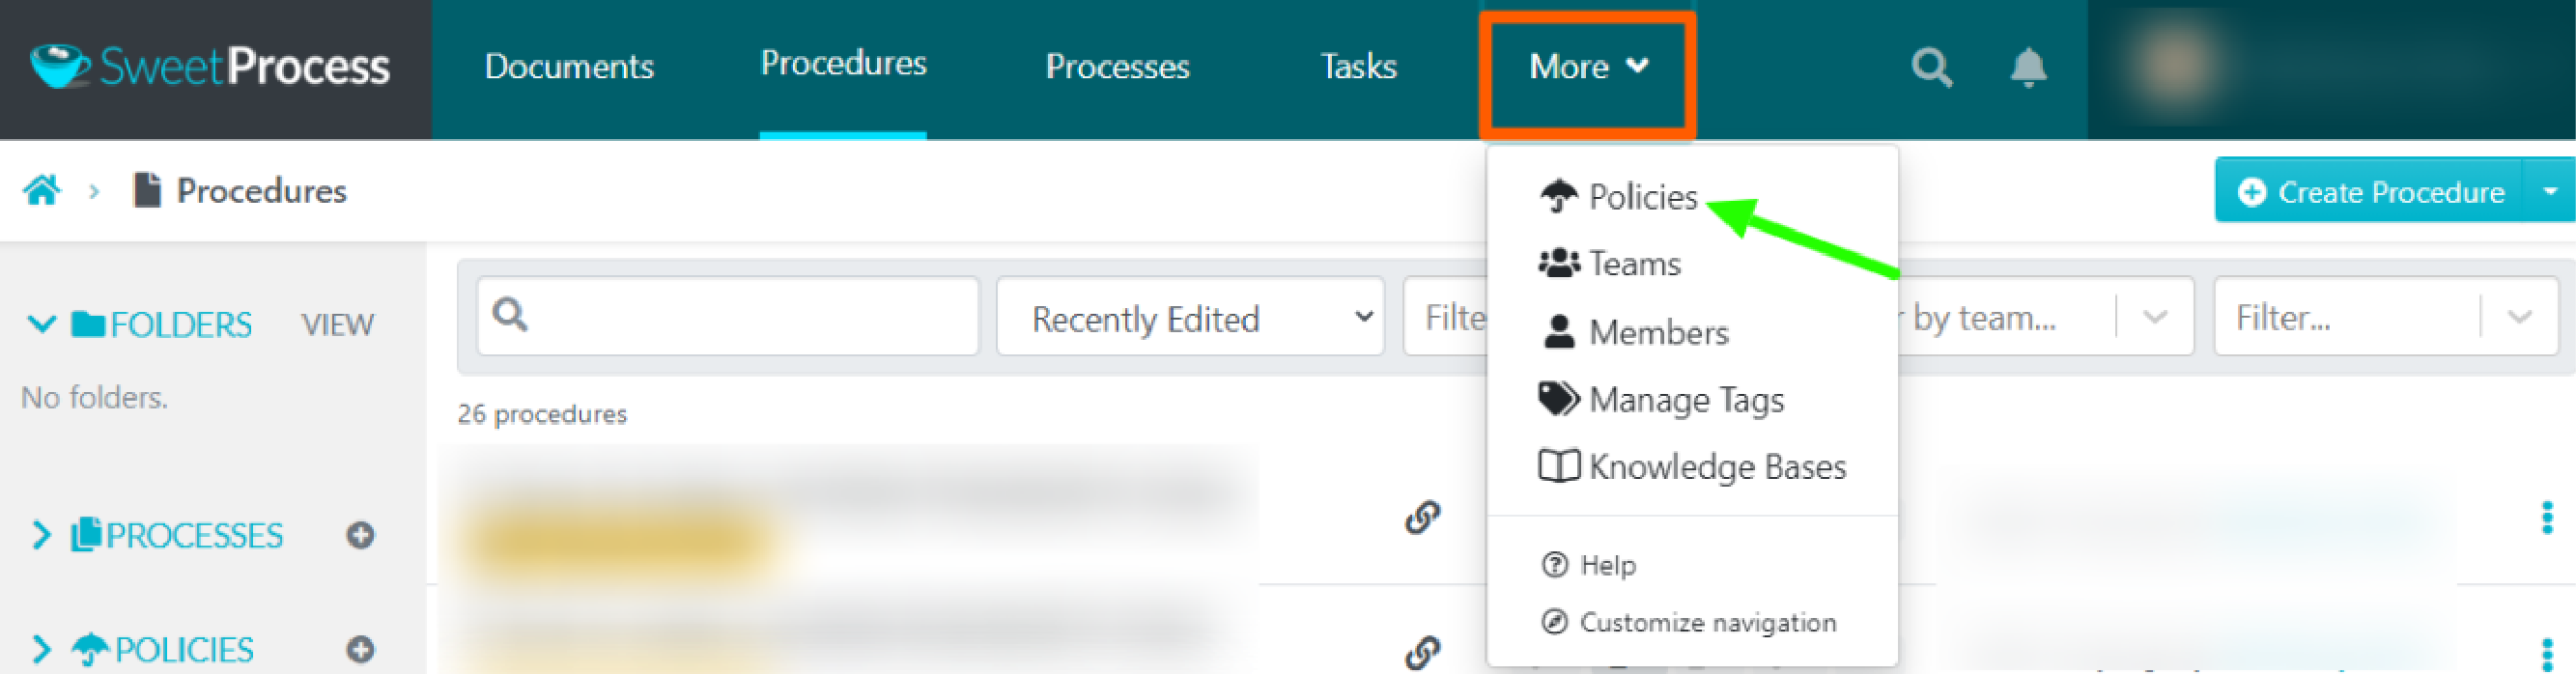 navigate to the “More” menu on your SweetProcess dashboard and click “Policies.”